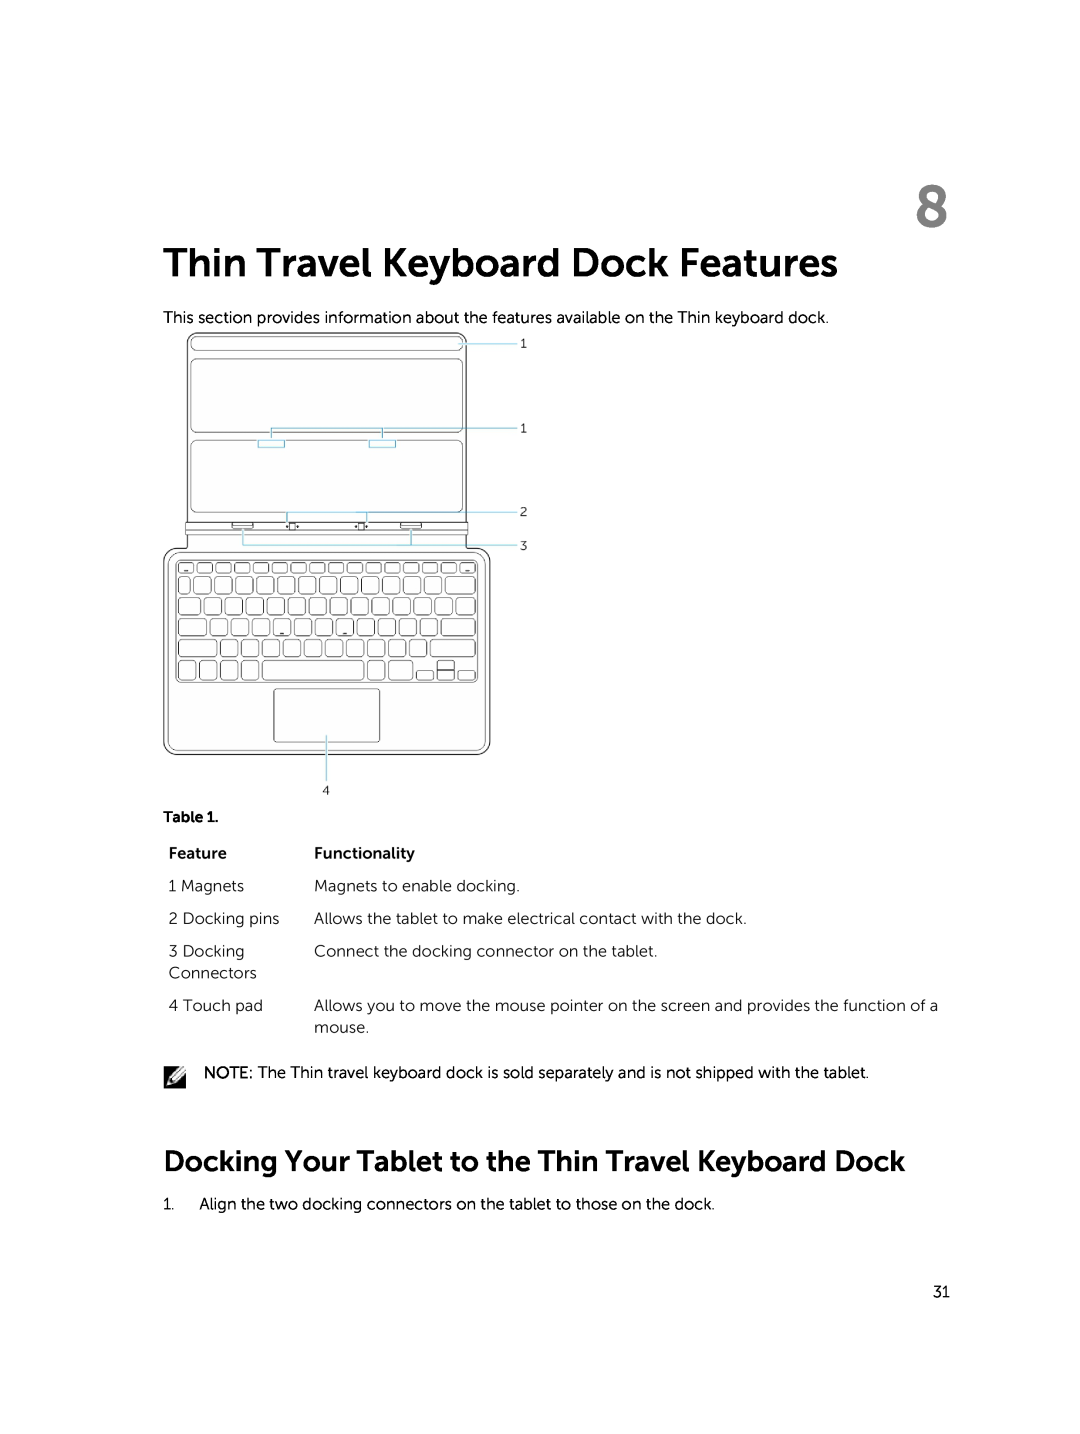 Dell T07G manual Thin Travel Keyboard Dock Features, Docking Your Tablet to the Thin Travel Keyboard Dock 